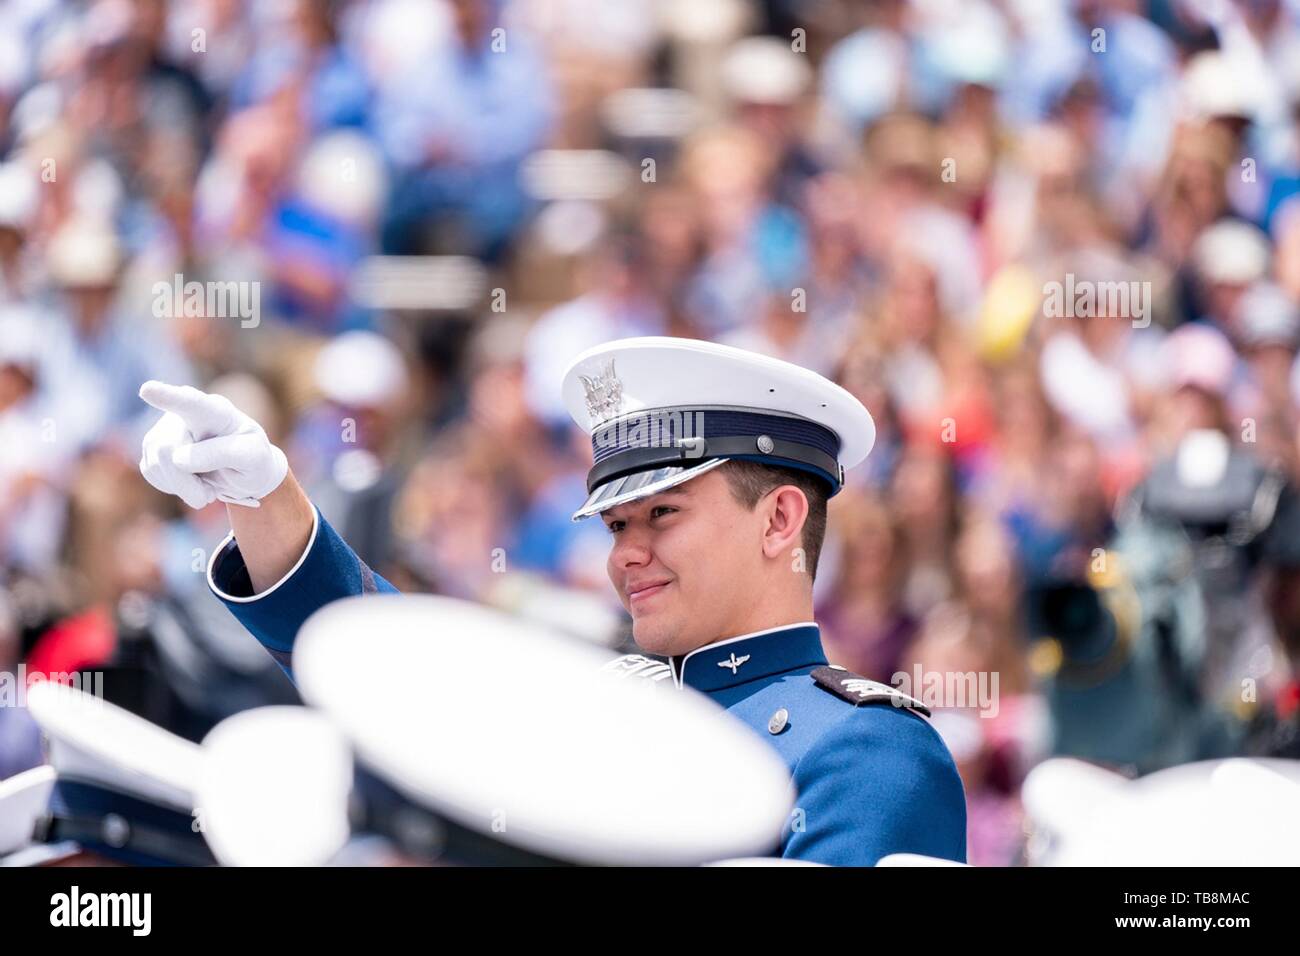 Colorado Springs, Colorado, USA. 30th May, 2019. U.S Air Force Academy cadets during the Graduation Ceremony at the USAF Academy Falcon Stadium May 30, 2019 in Colorado Springs, Colorado. Credit: Planetpix/Alamy Live News Stock Photo